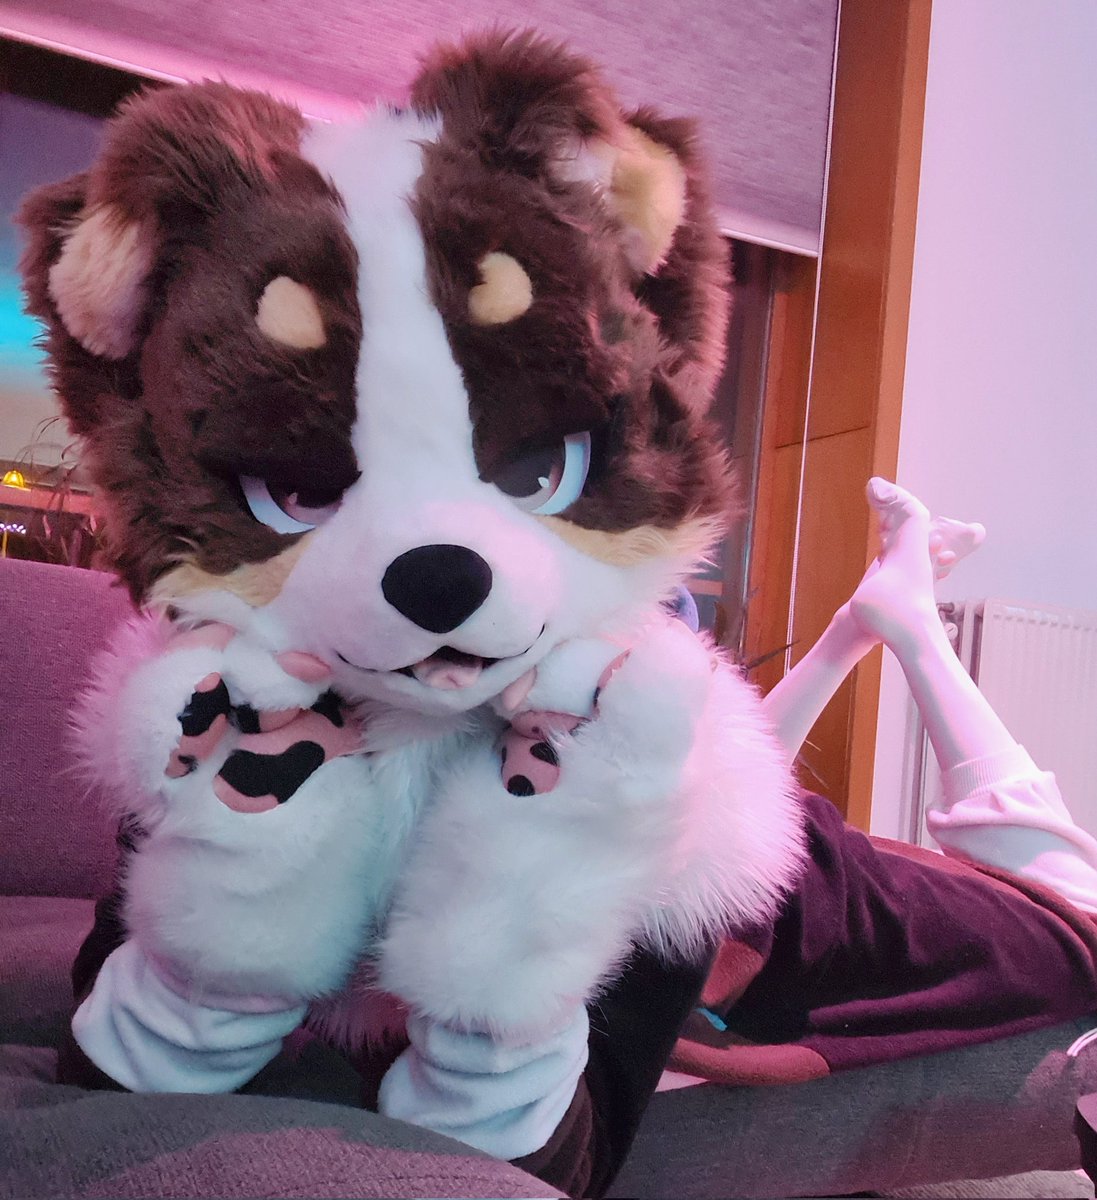 Let's spend the night on the couch this #FursuitFriday